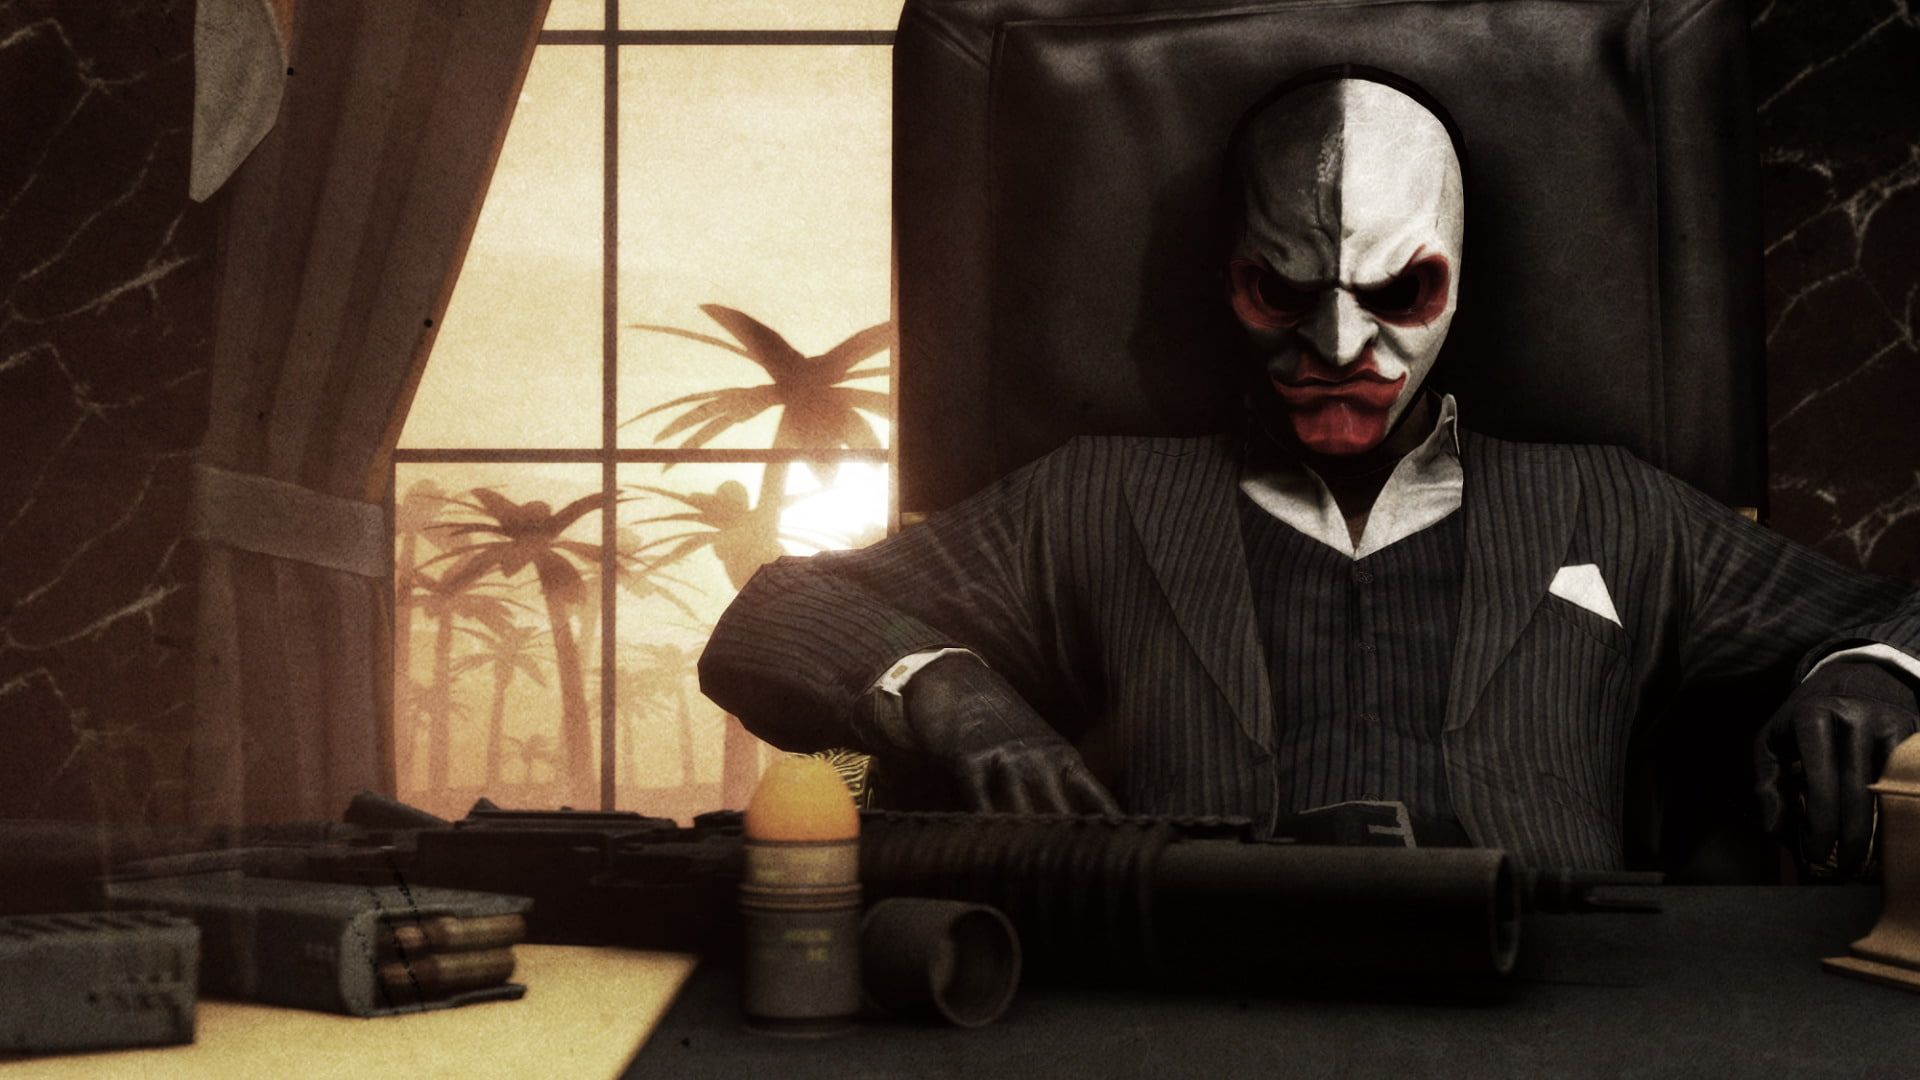 1920x1080 Payday Payday 2 Scarface (Payday) #1080P #wallpaper #hdwallpaper #desktop | Scarface, Payday 2, Payday